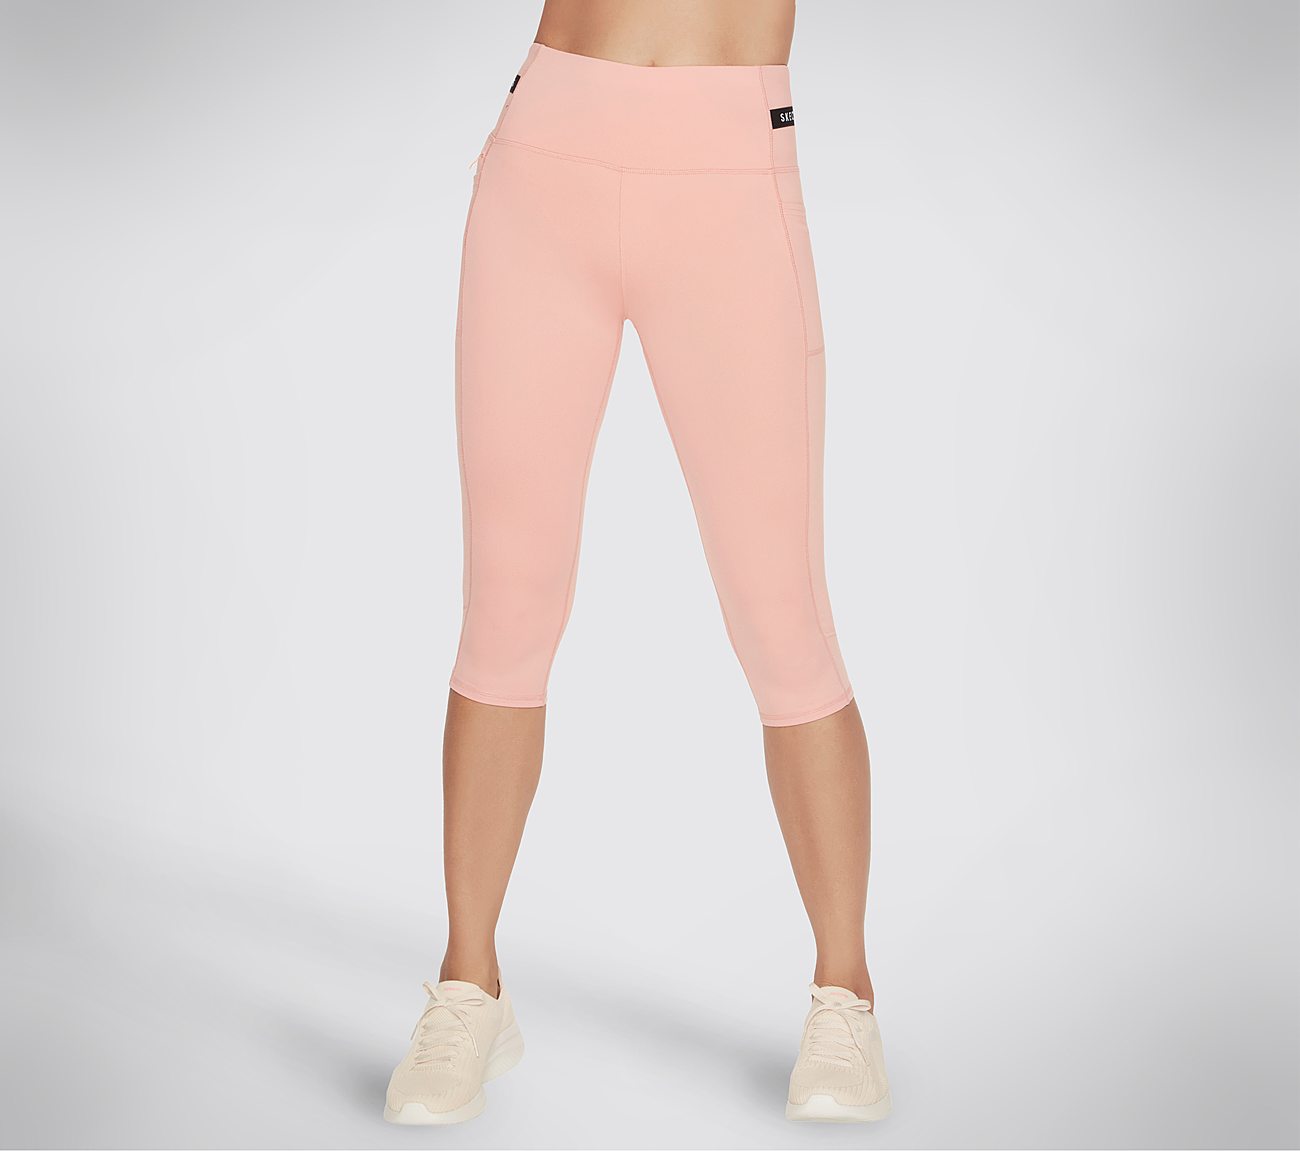 GOSTRETCH CAPRI, CORAL/LIME Apparel Lateral View